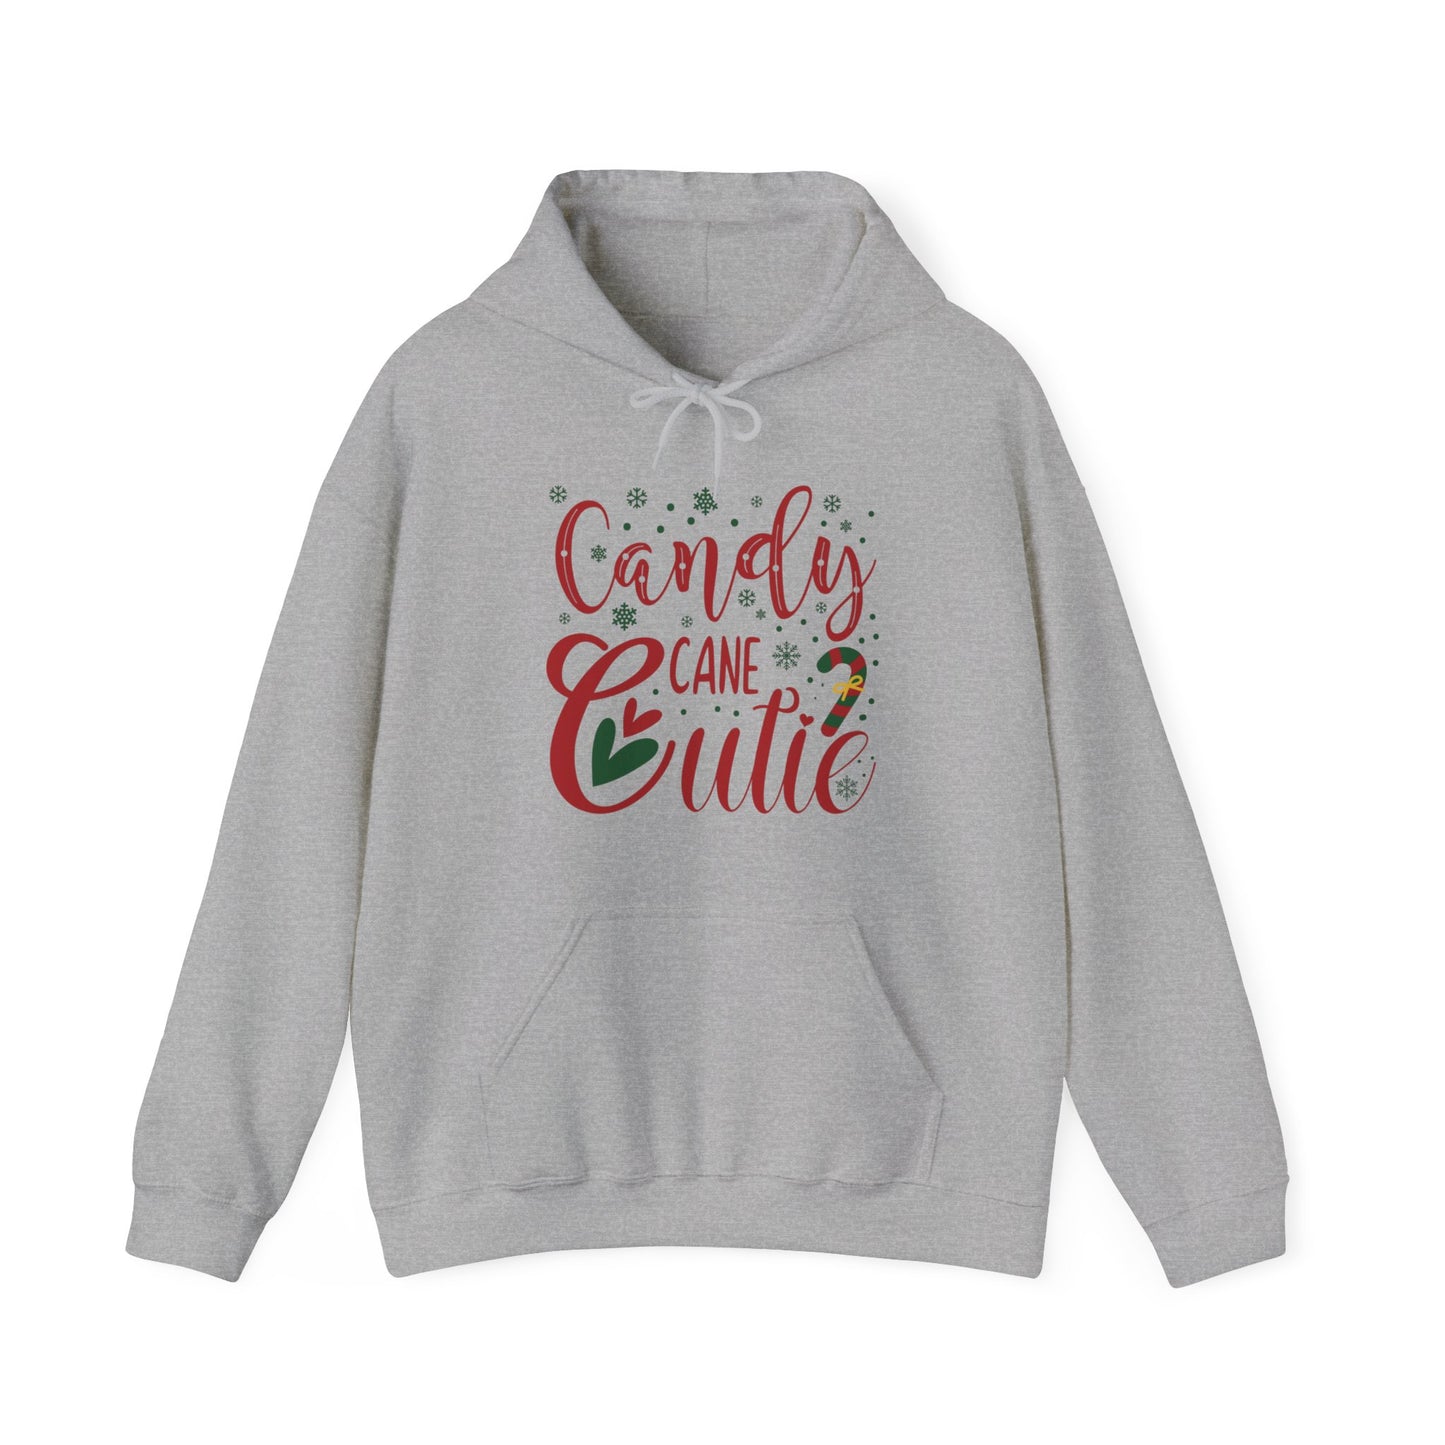 Christmasy Hooded Sweatshirt For Cute Christmas Hoodie For Candy Cane Lover Clothing